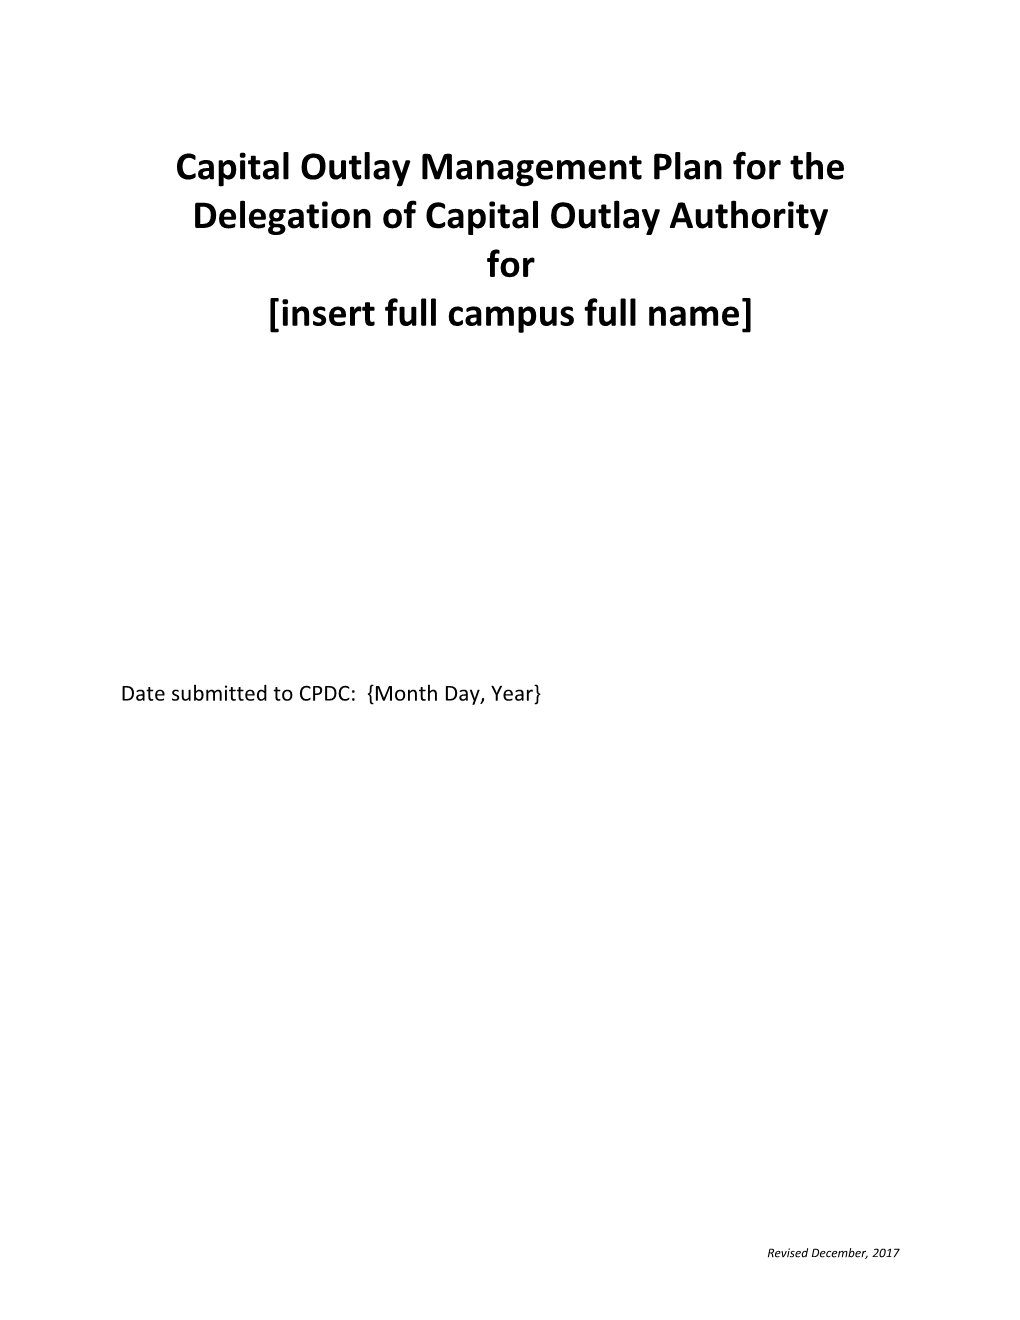 Guidelines for the Development of Campus Operational Plans for Delegation of Capital Outlay